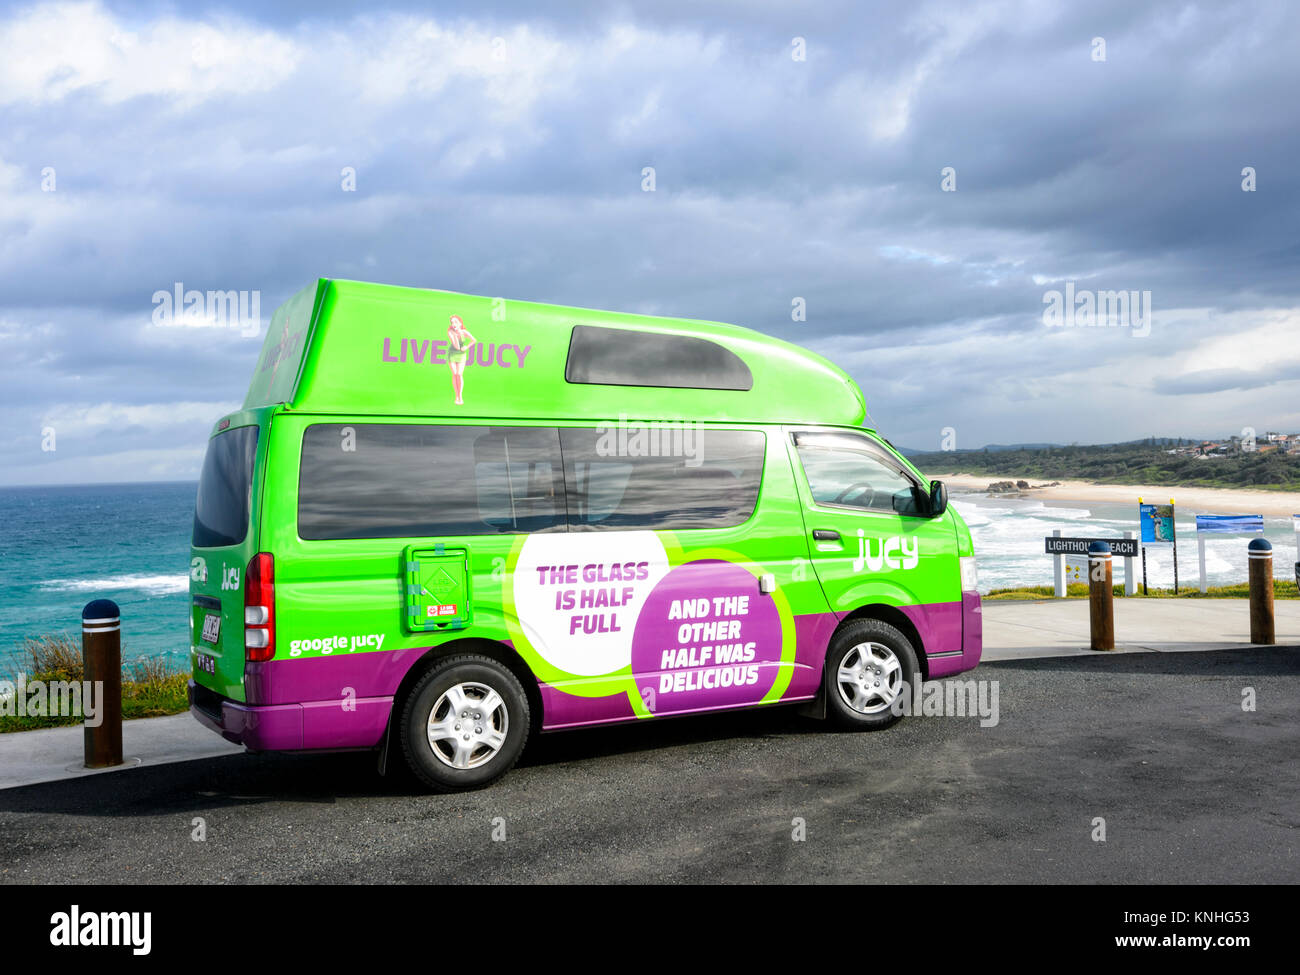 Cheap Jucy campervan rental with a joke, New South Wales, NSW, Australia Stock Photo